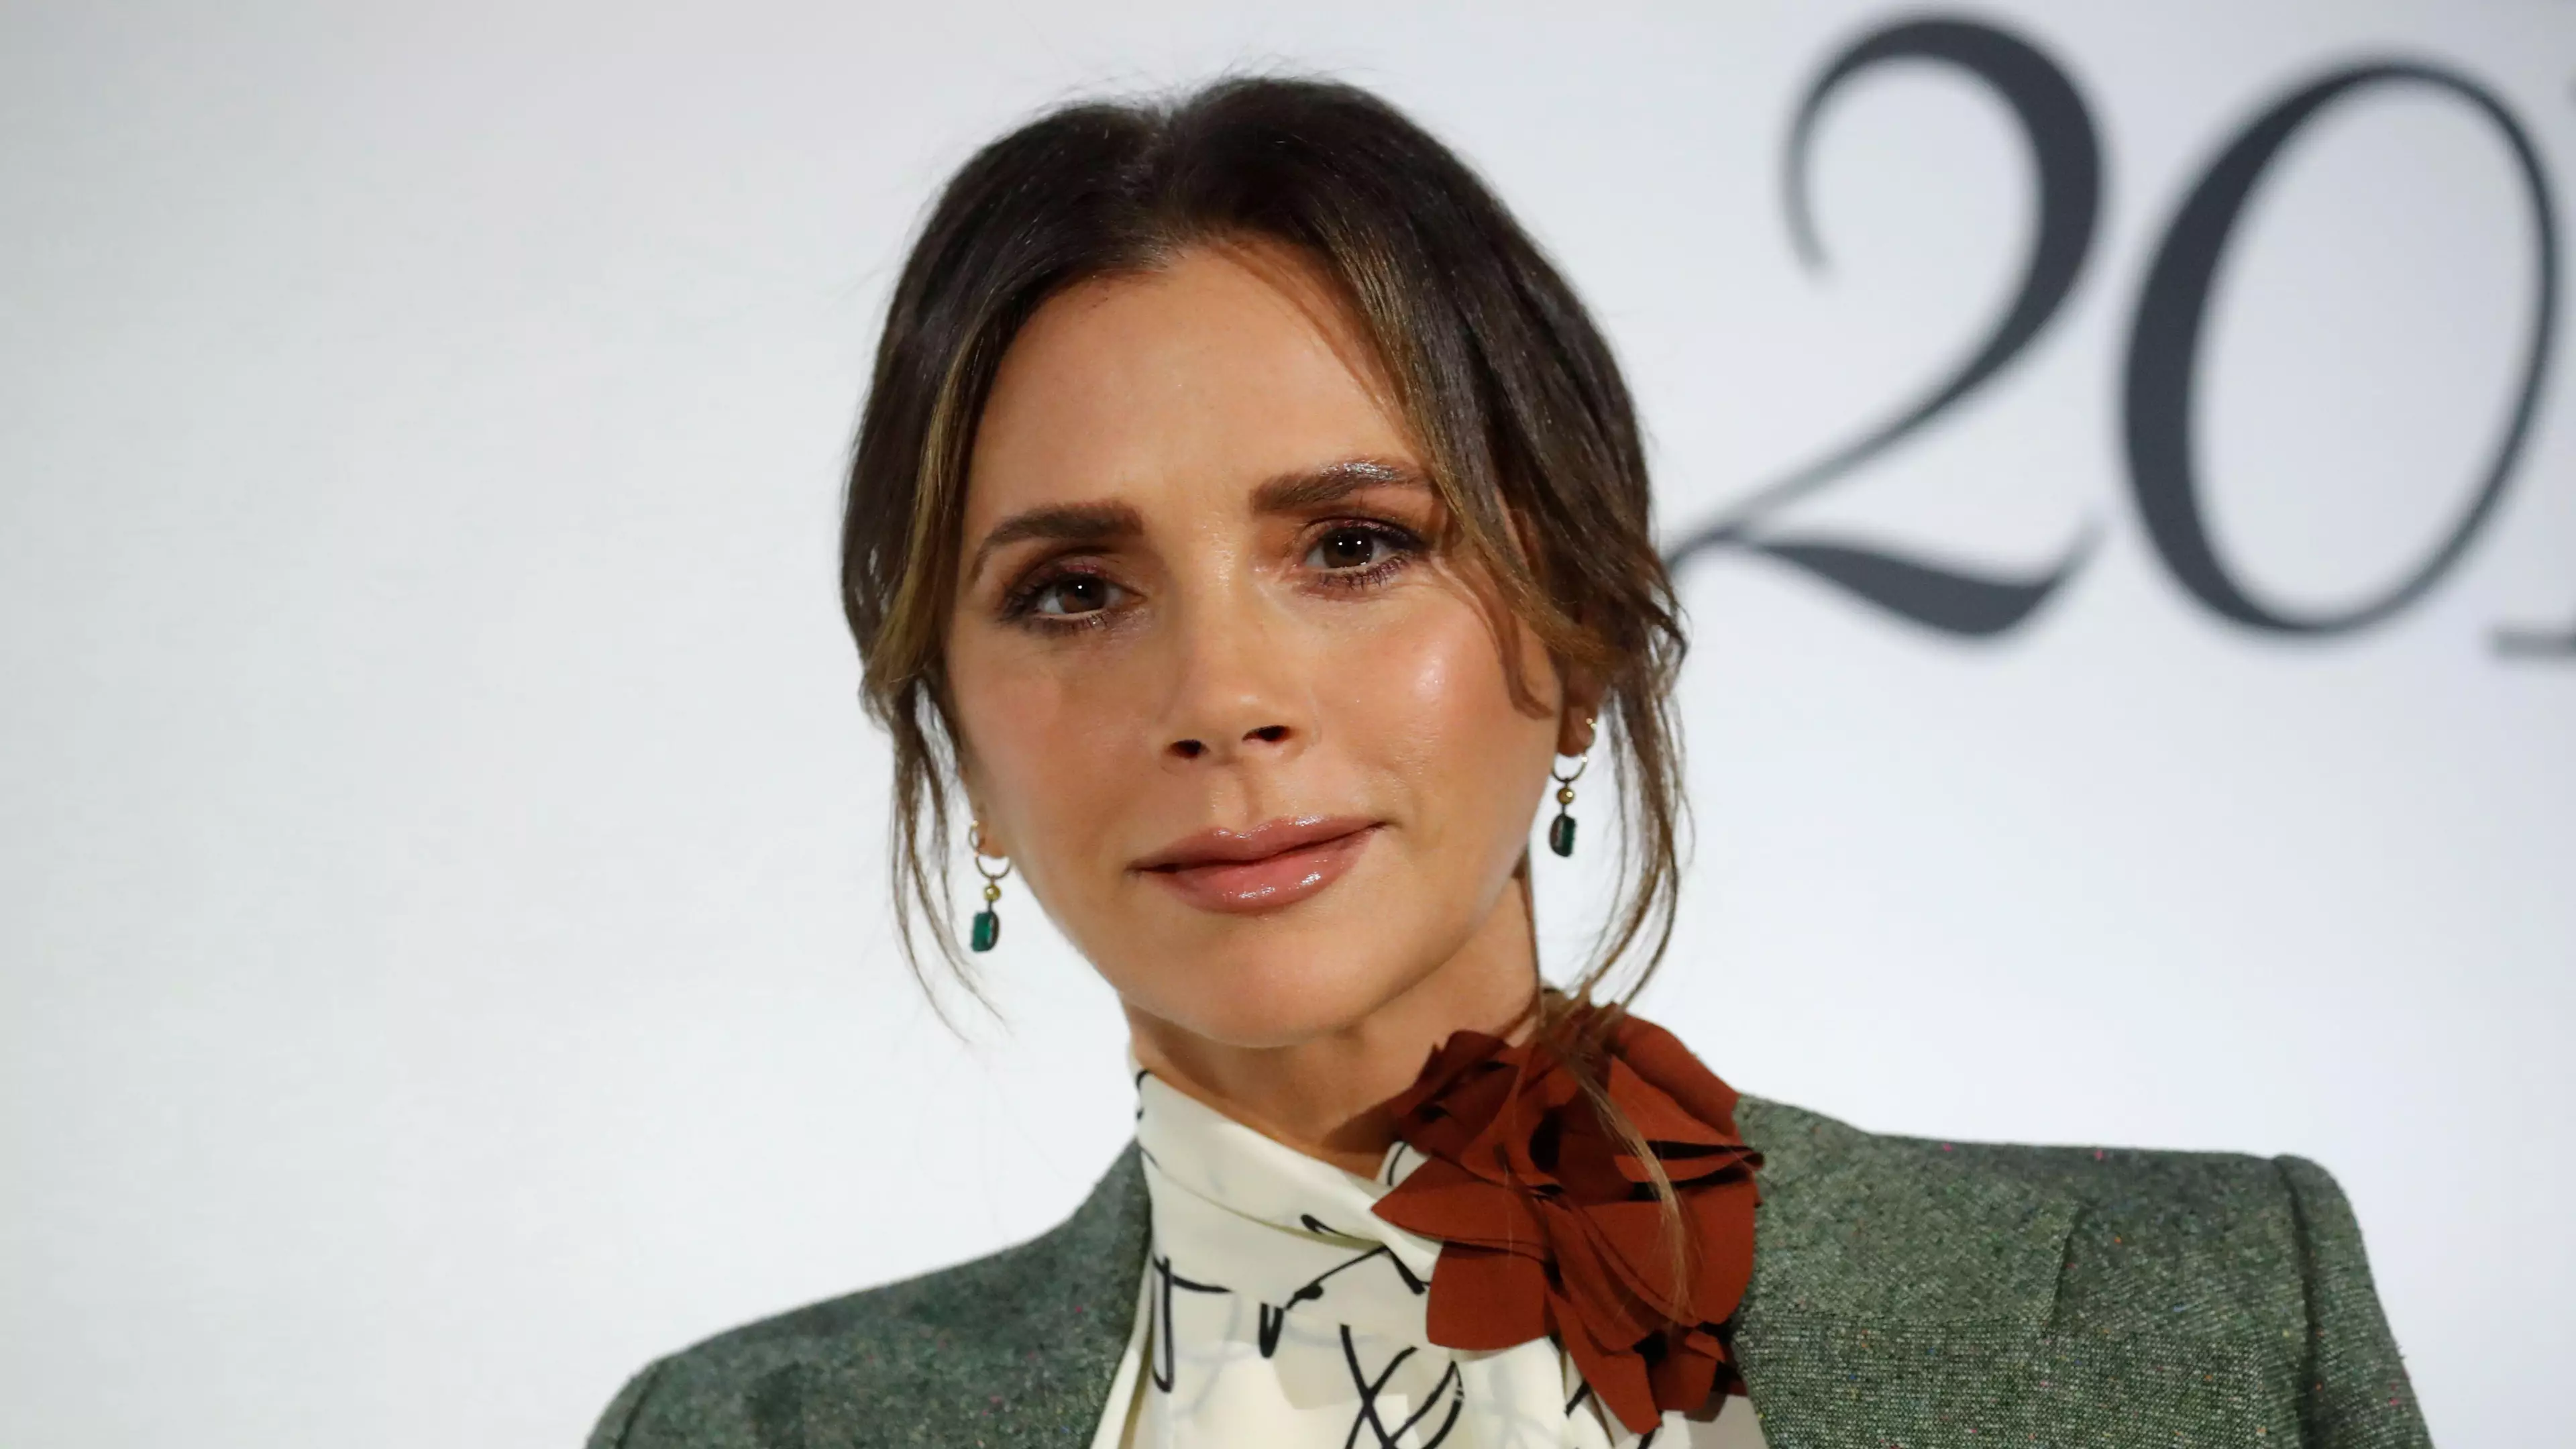 People Baffled After Victoria Beckham Says Her Favourite Thing To Eat Is Salt On Toast